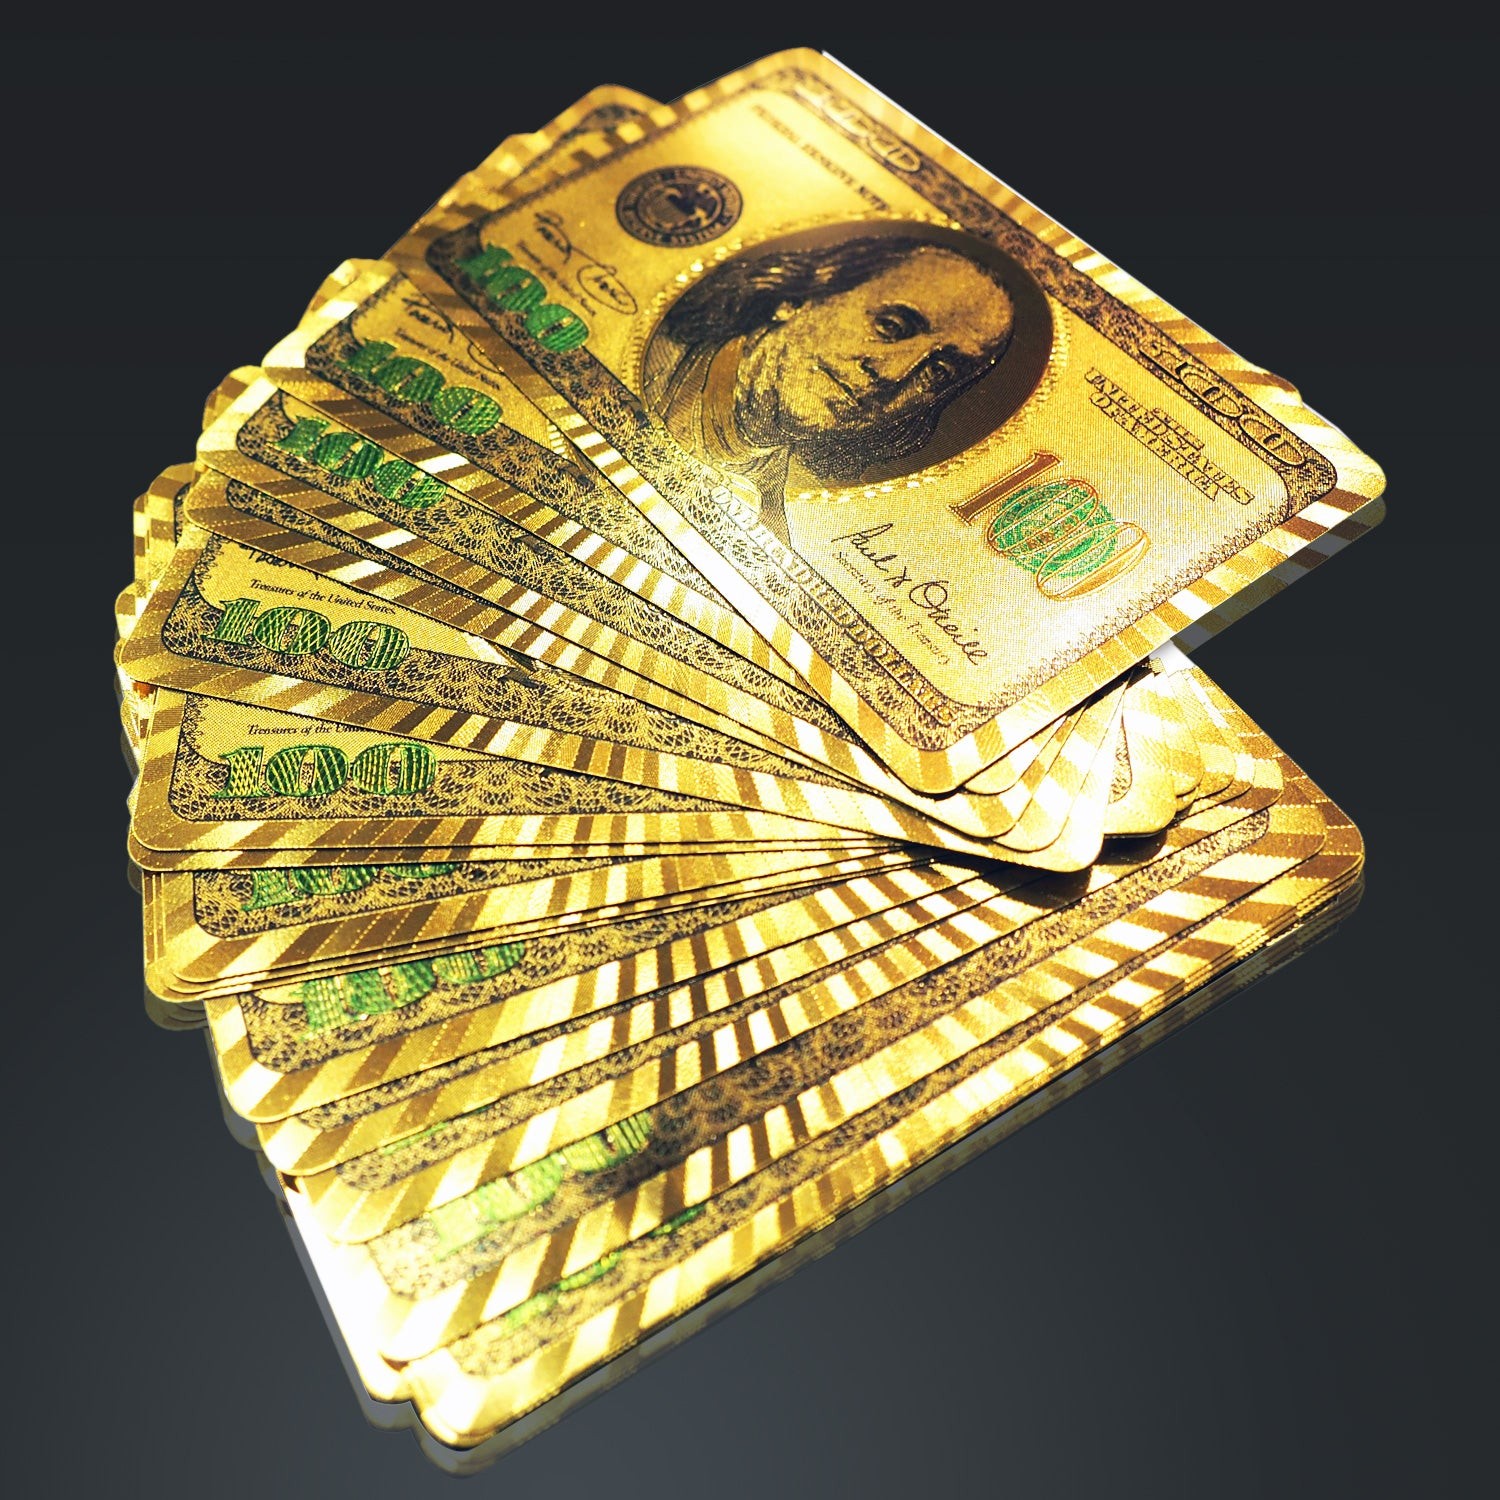 $100 Gold Playing Cards